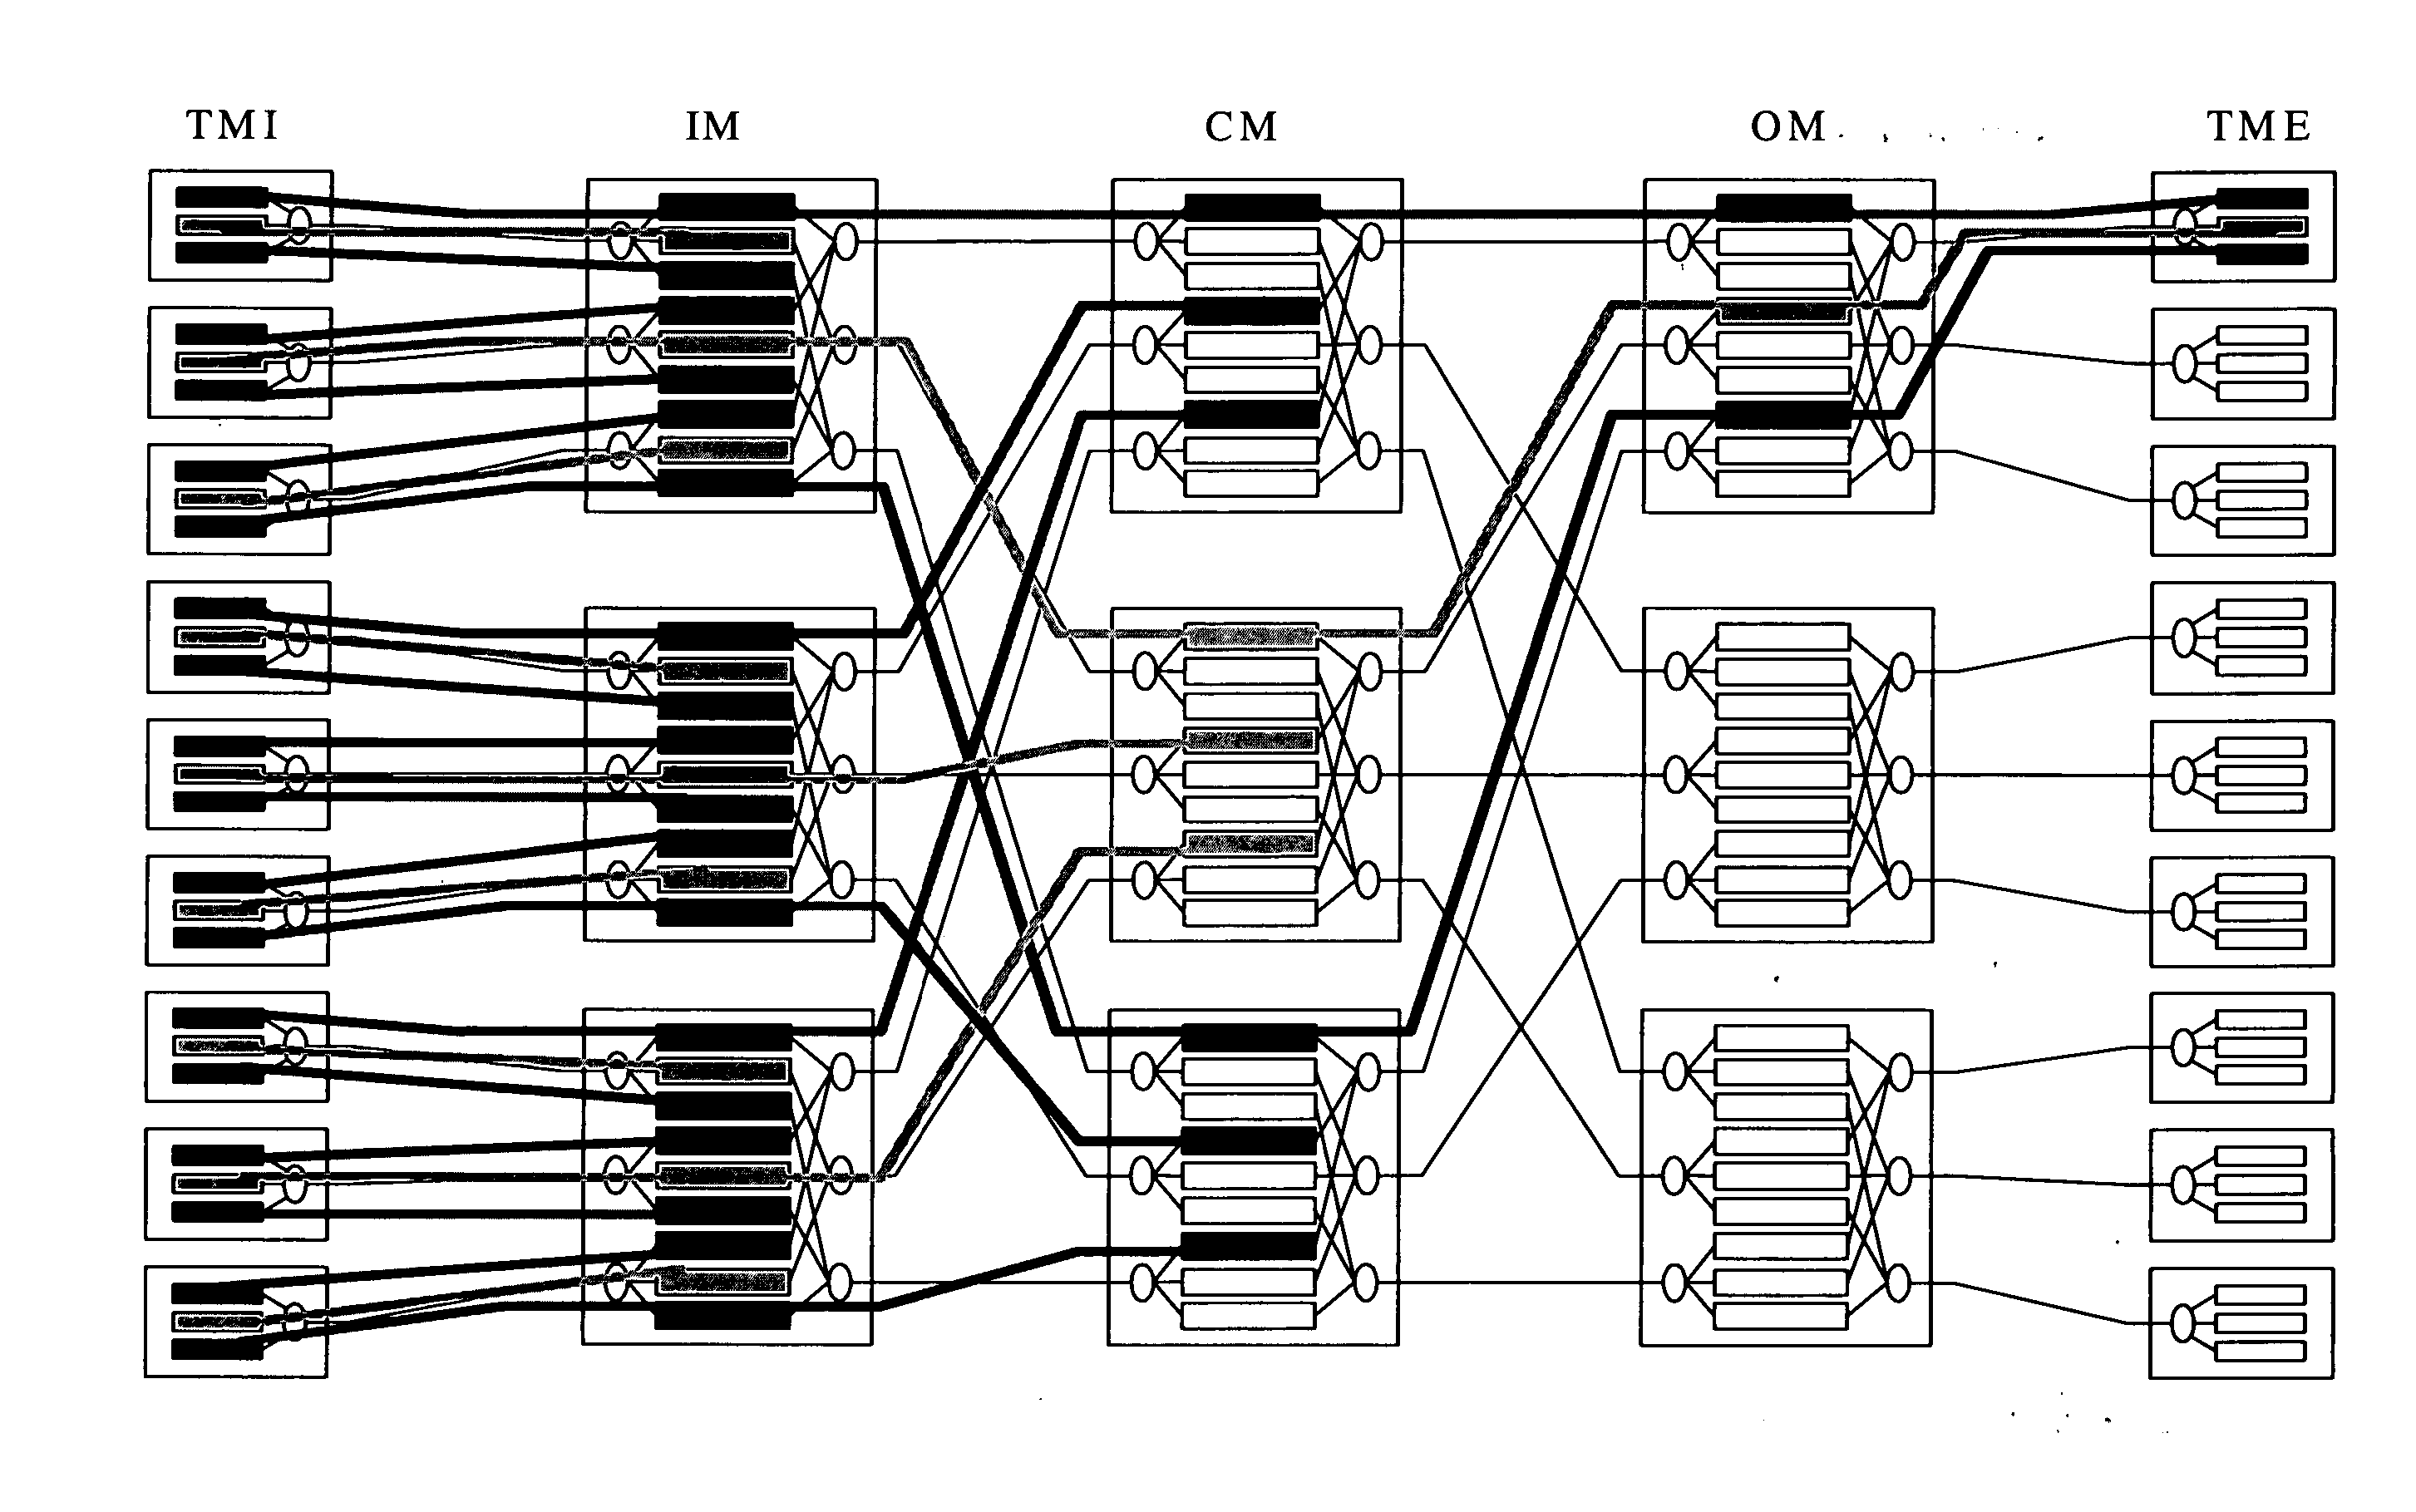 Packet sequence maintenance with load balancing, and head-of-line blocking avoidance in a switch